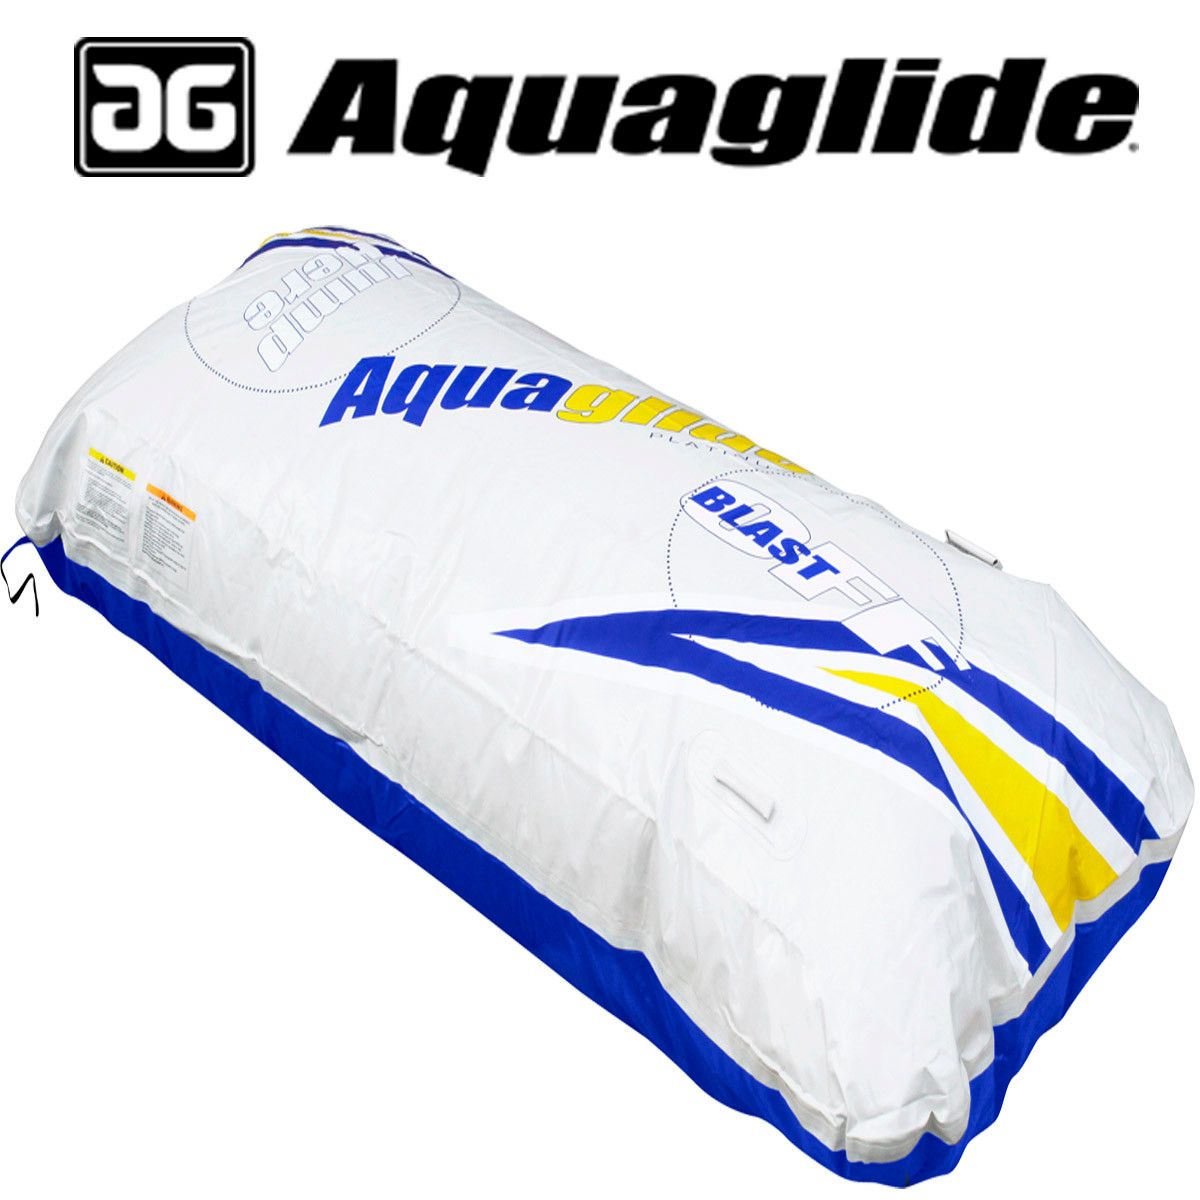 Aquaglide Blast Bag Attachment for the Lowest Price at RIDE THE WAVE